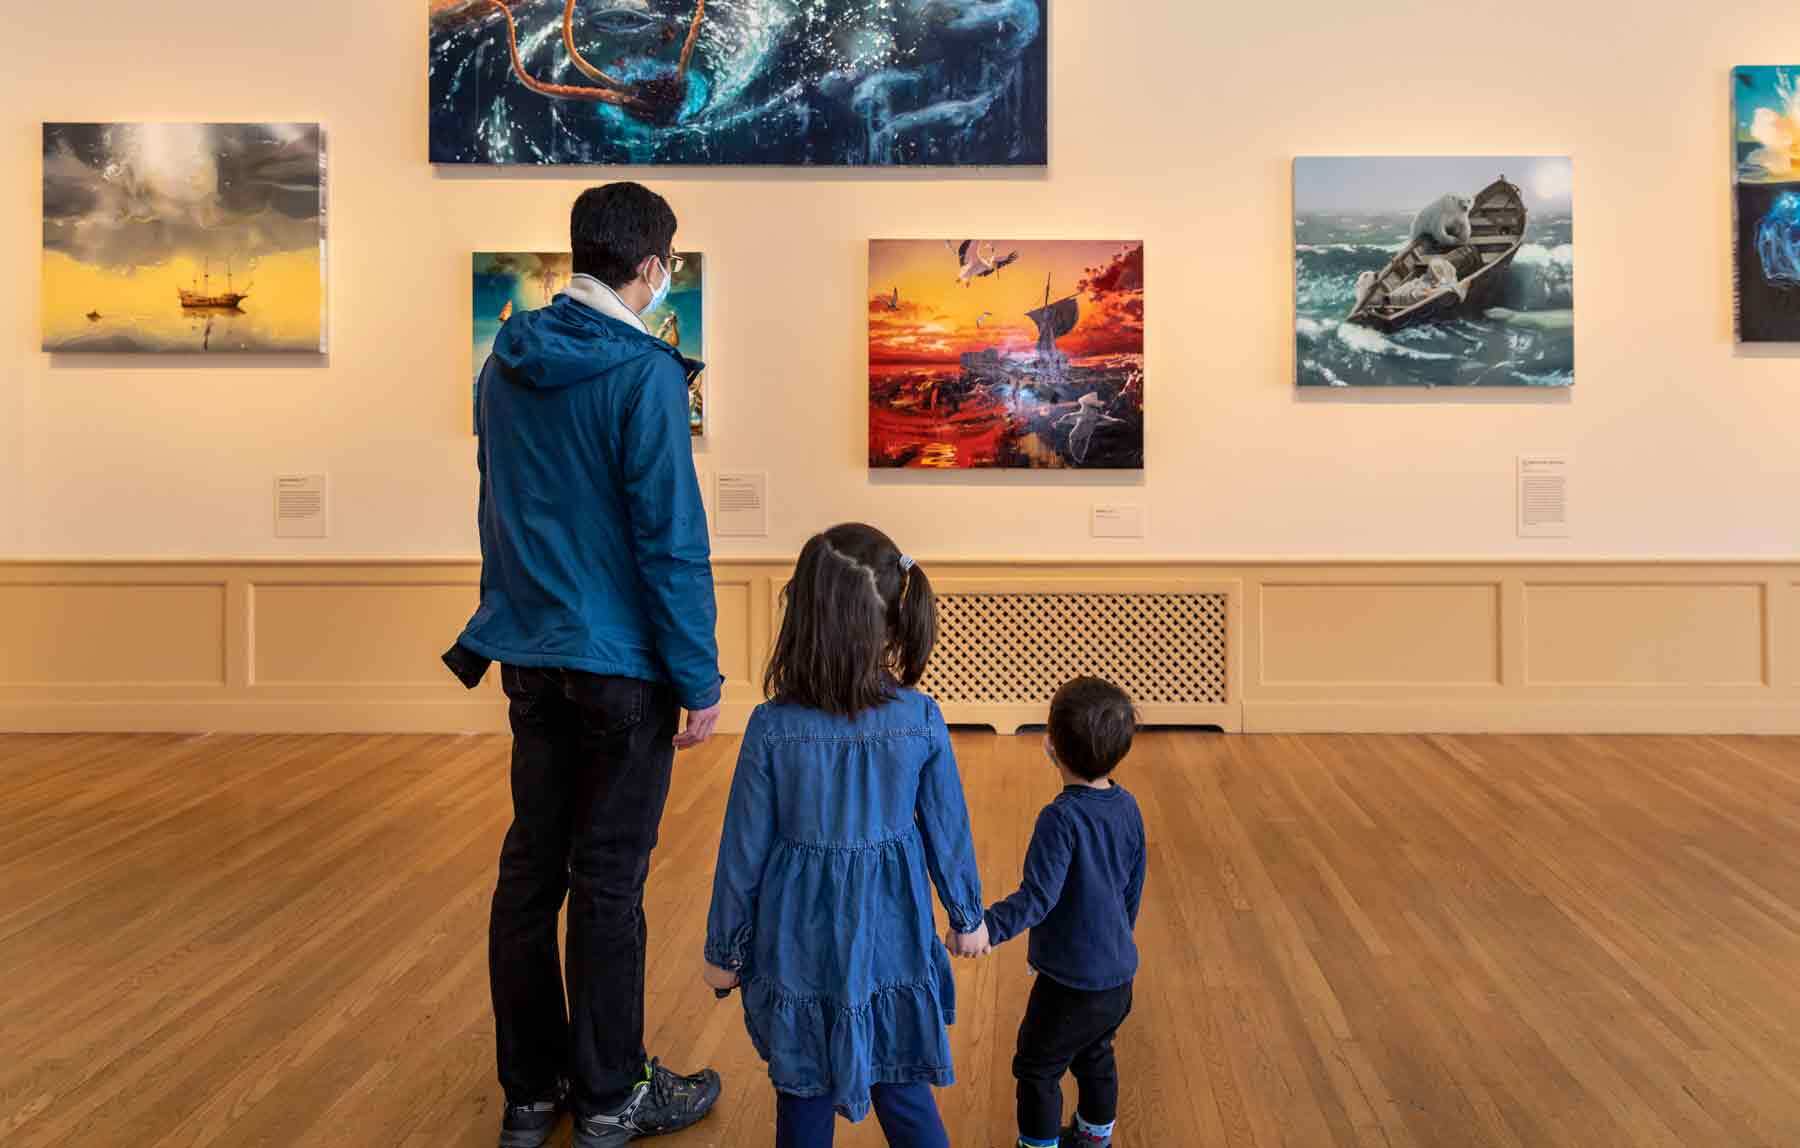 One adult and two children visitors looking at a gallery wall of paintings depicting fantastical shipwrecks